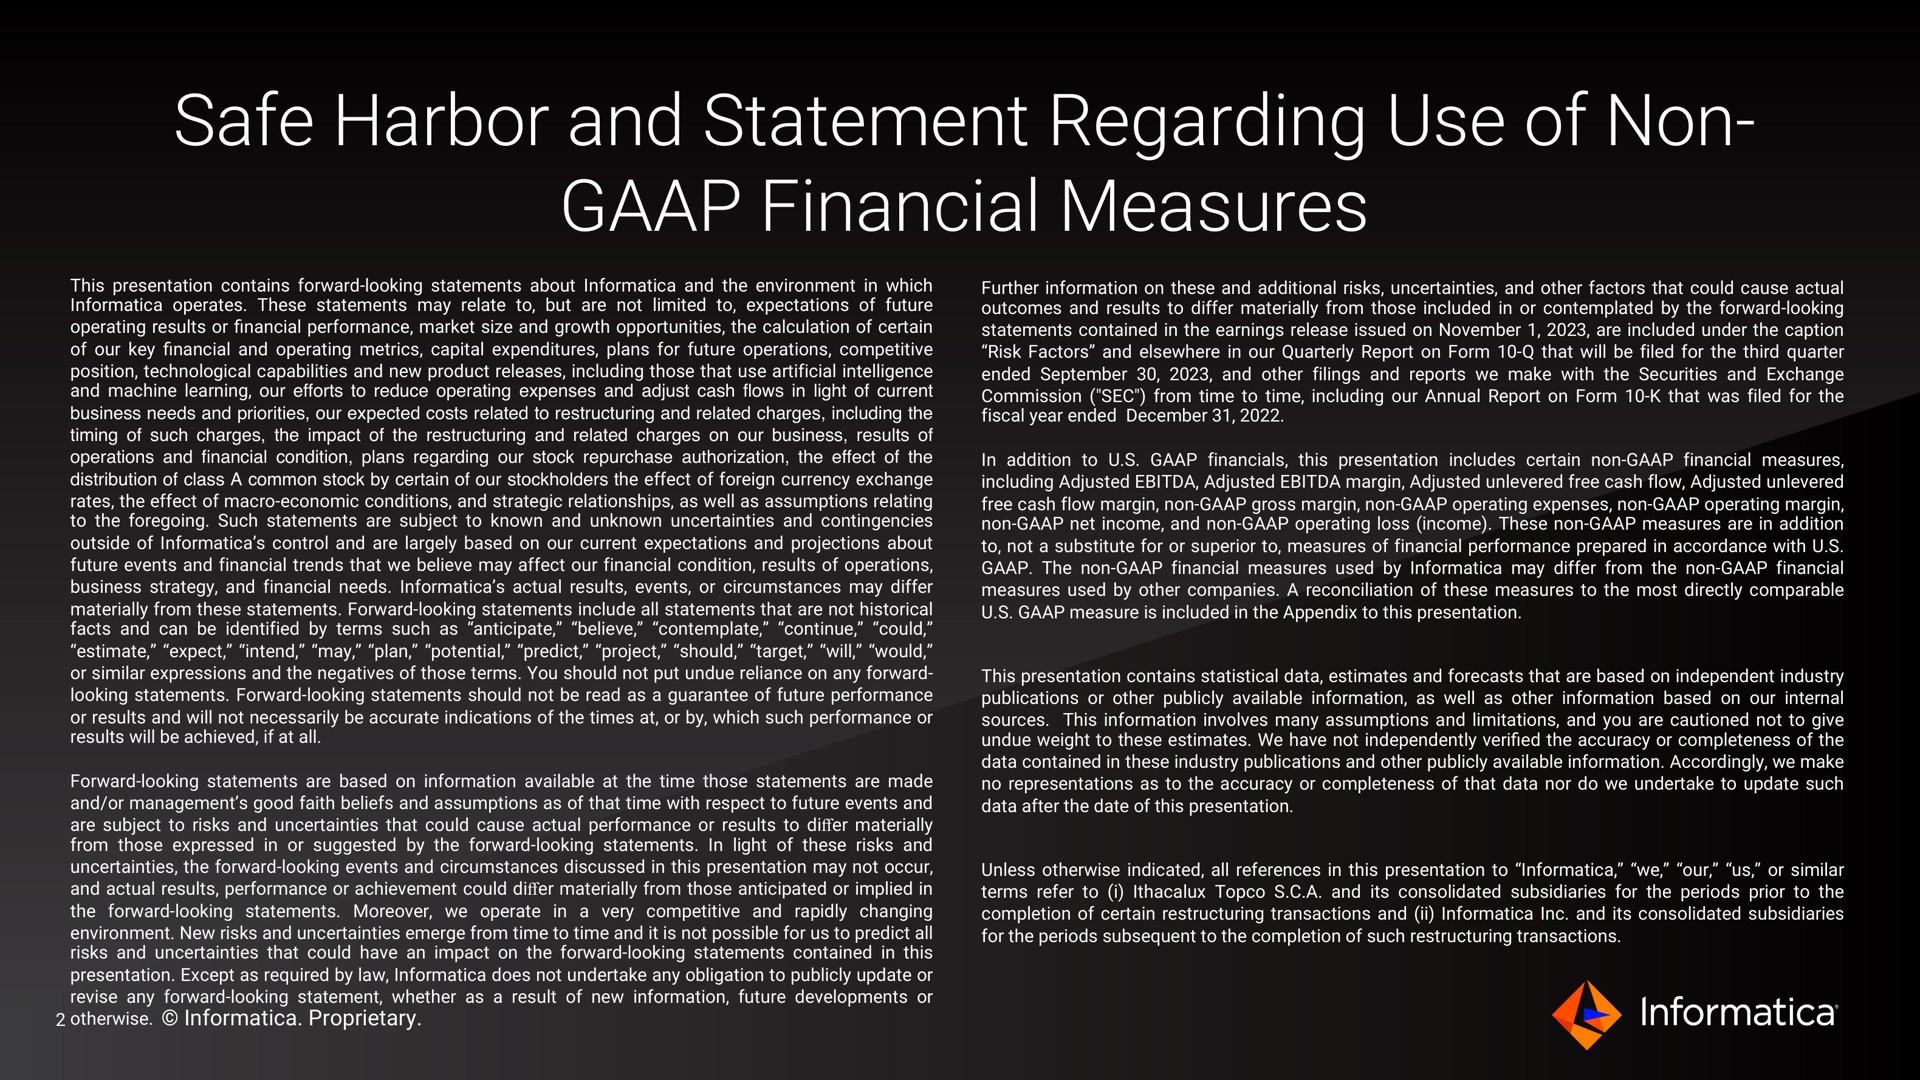 safe harbor and statement regarding use of non financial measures | Informatica